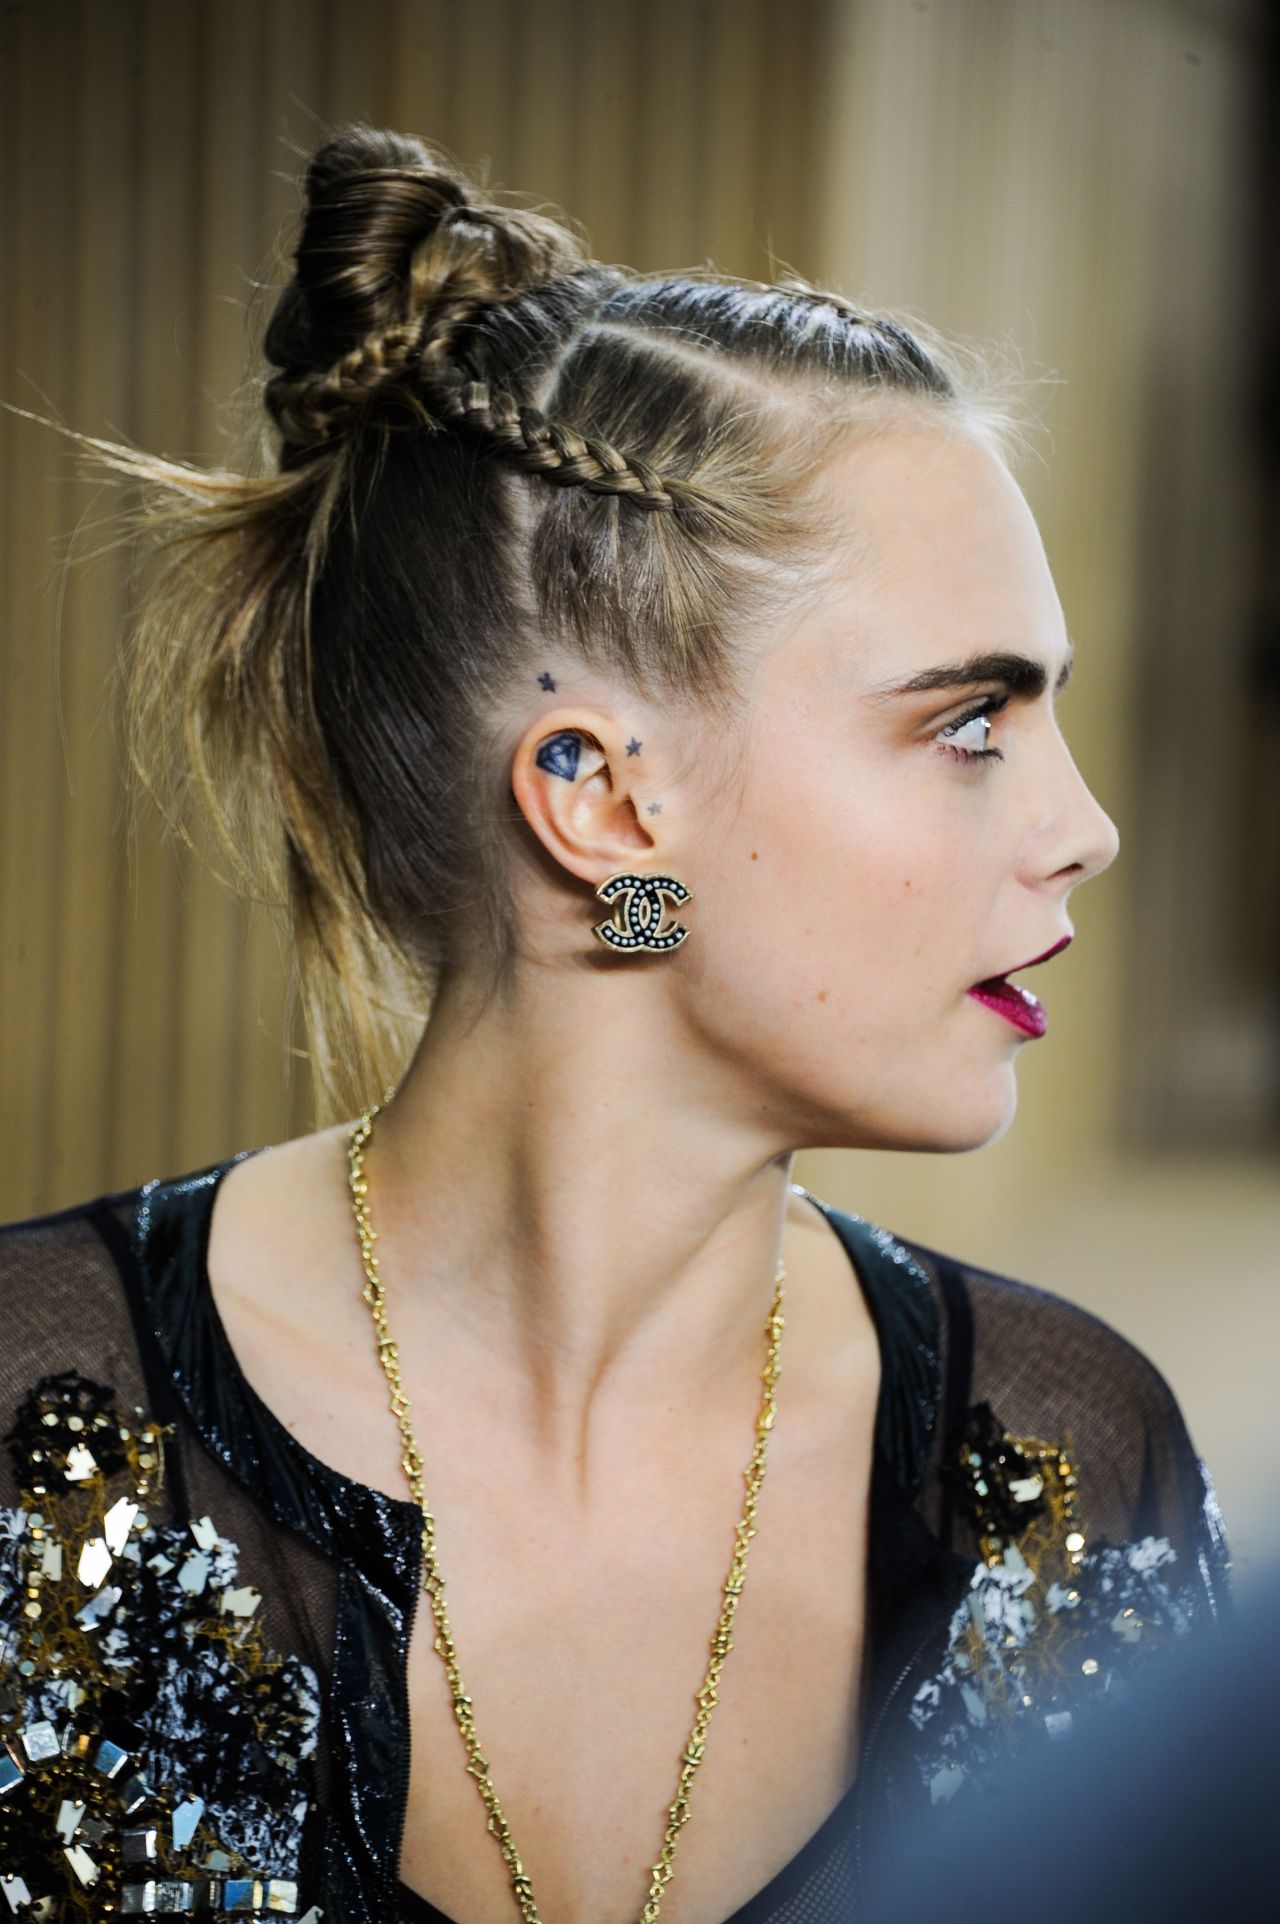 cara-delevingne-chanel-haute-couture-spring-summer-2016-fashion-show-in-paris-3